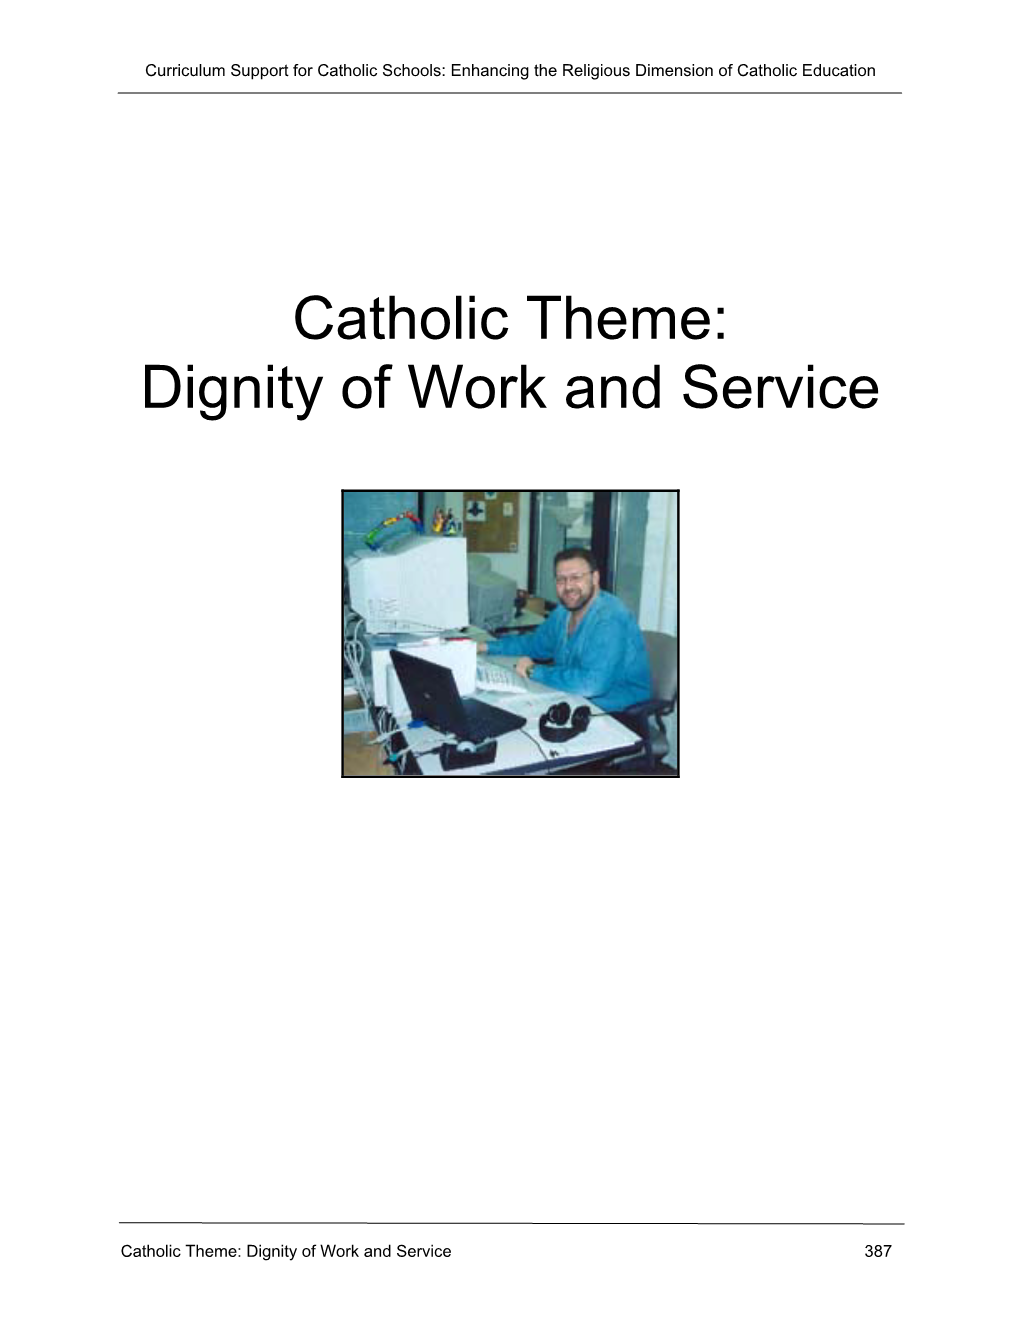 Catholic Theme: Dignity of Work and Service